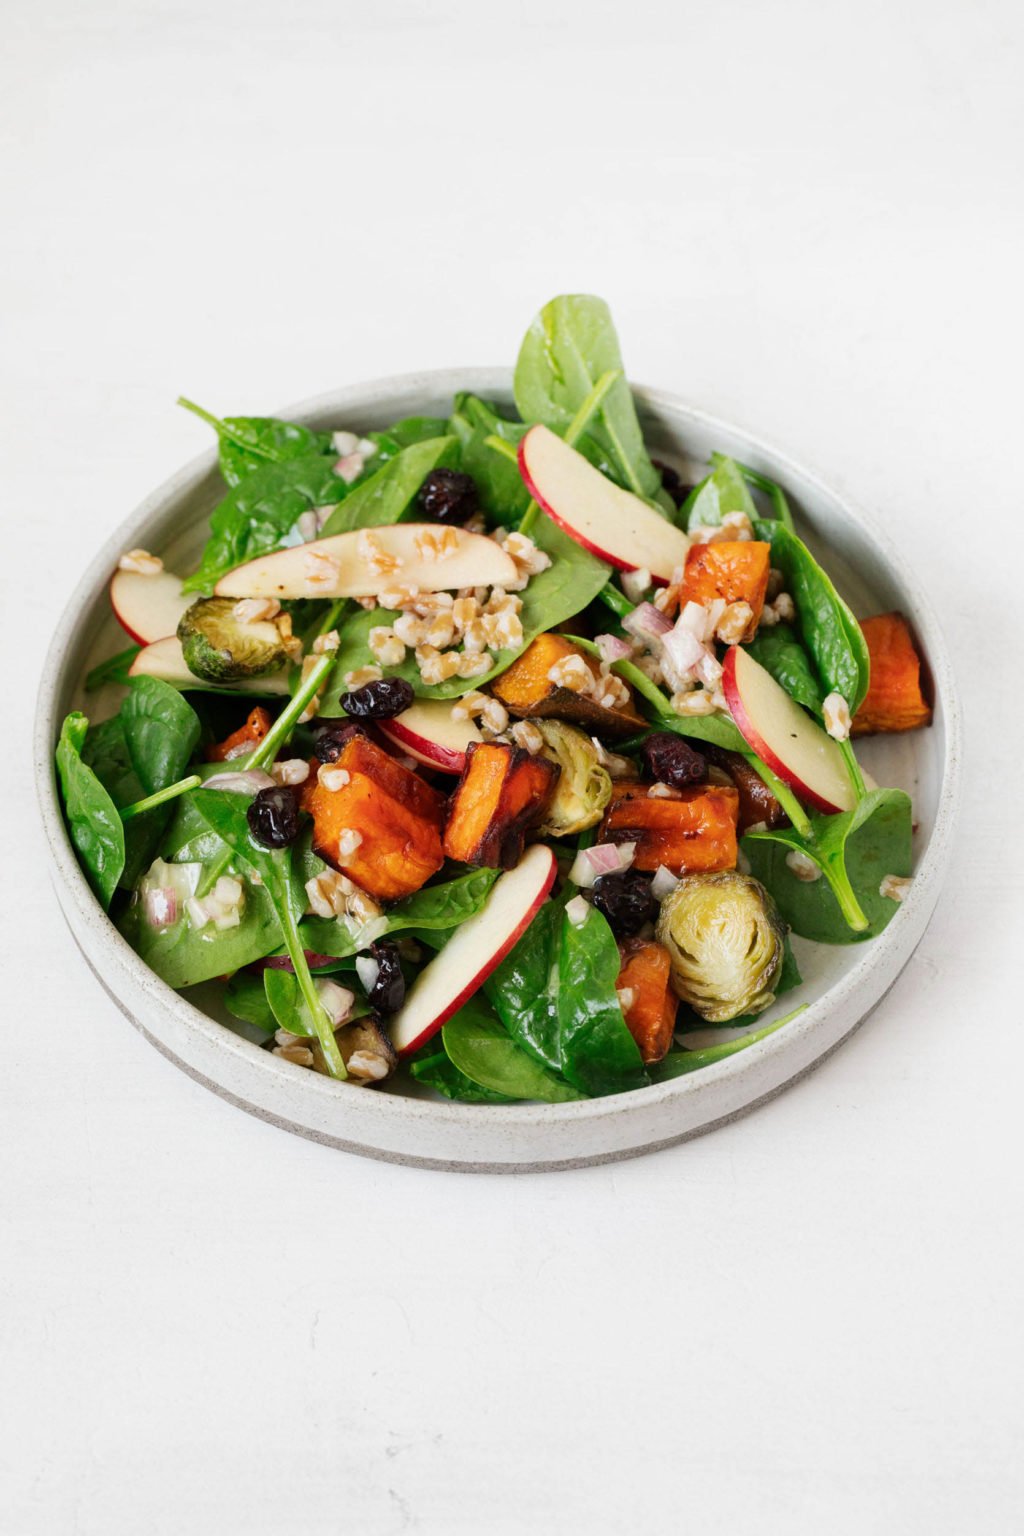 A rimmed, white salad plate is piled high with greens, roasted potatoes, thinly sliced apples, and cooked whole grains. Everything is dressed with a vinaigrette.